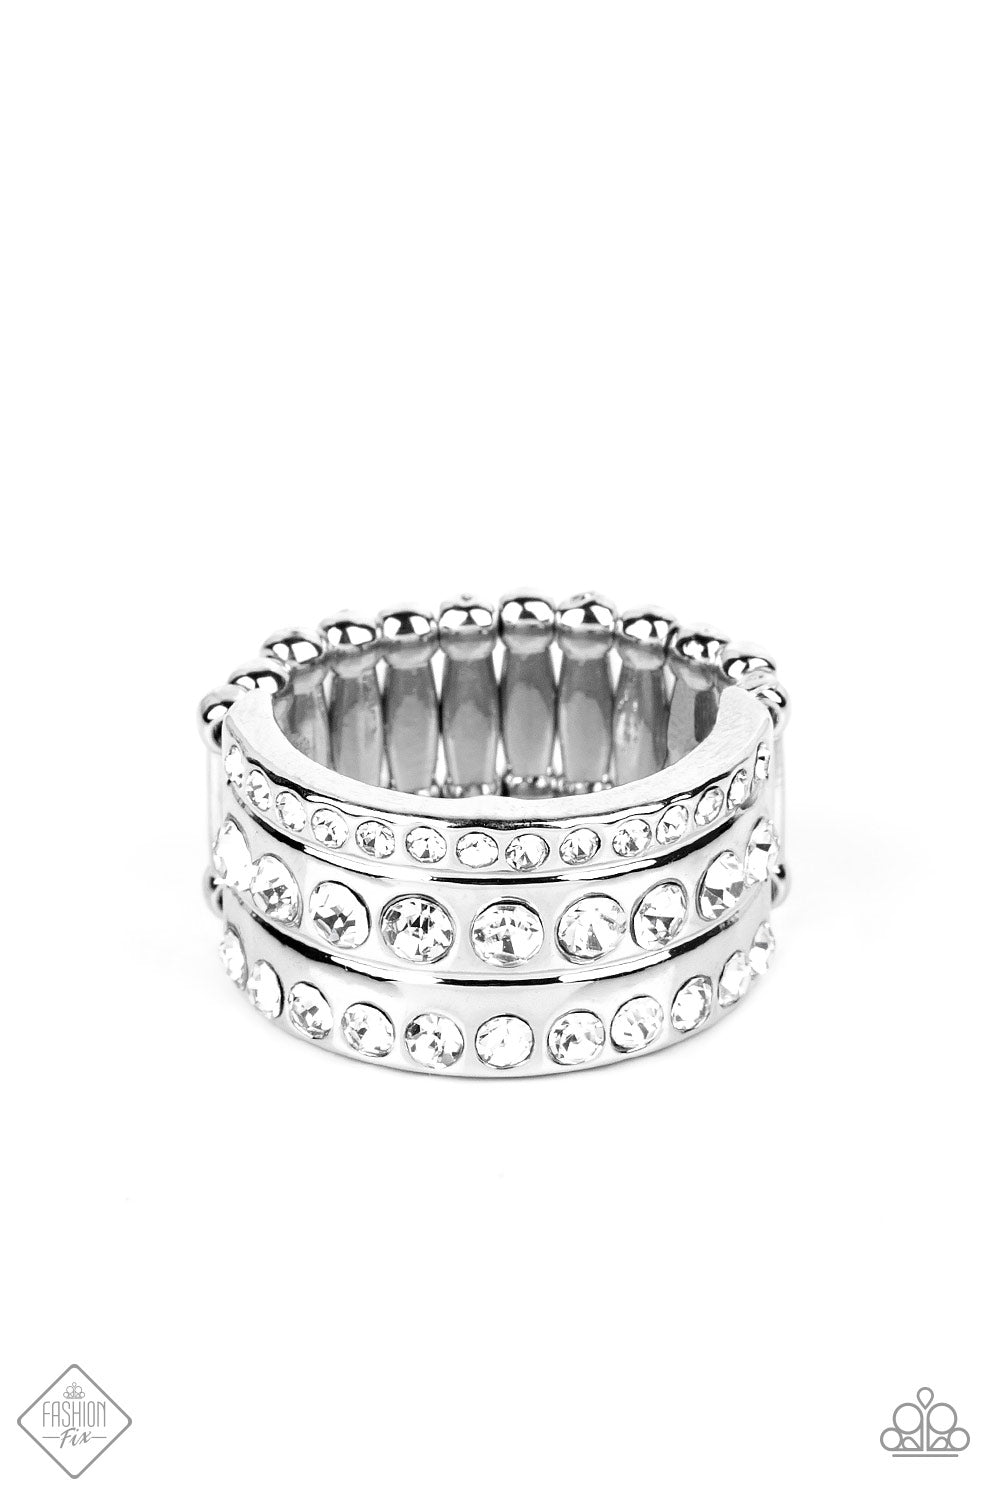 Privileged Poise - White and Silver Fashion Ring - Paparazzi Accessories - A thick band of high-sheen silver is topped with three rows of glittery white rhinestones, creating the illusion of three separate bands. The rhinestones gradually decrease in size from the centermost band, adding depth and dimension to the poised centerpiece. Features a stretchy band for a flexible fit. Sold as one individual ring.